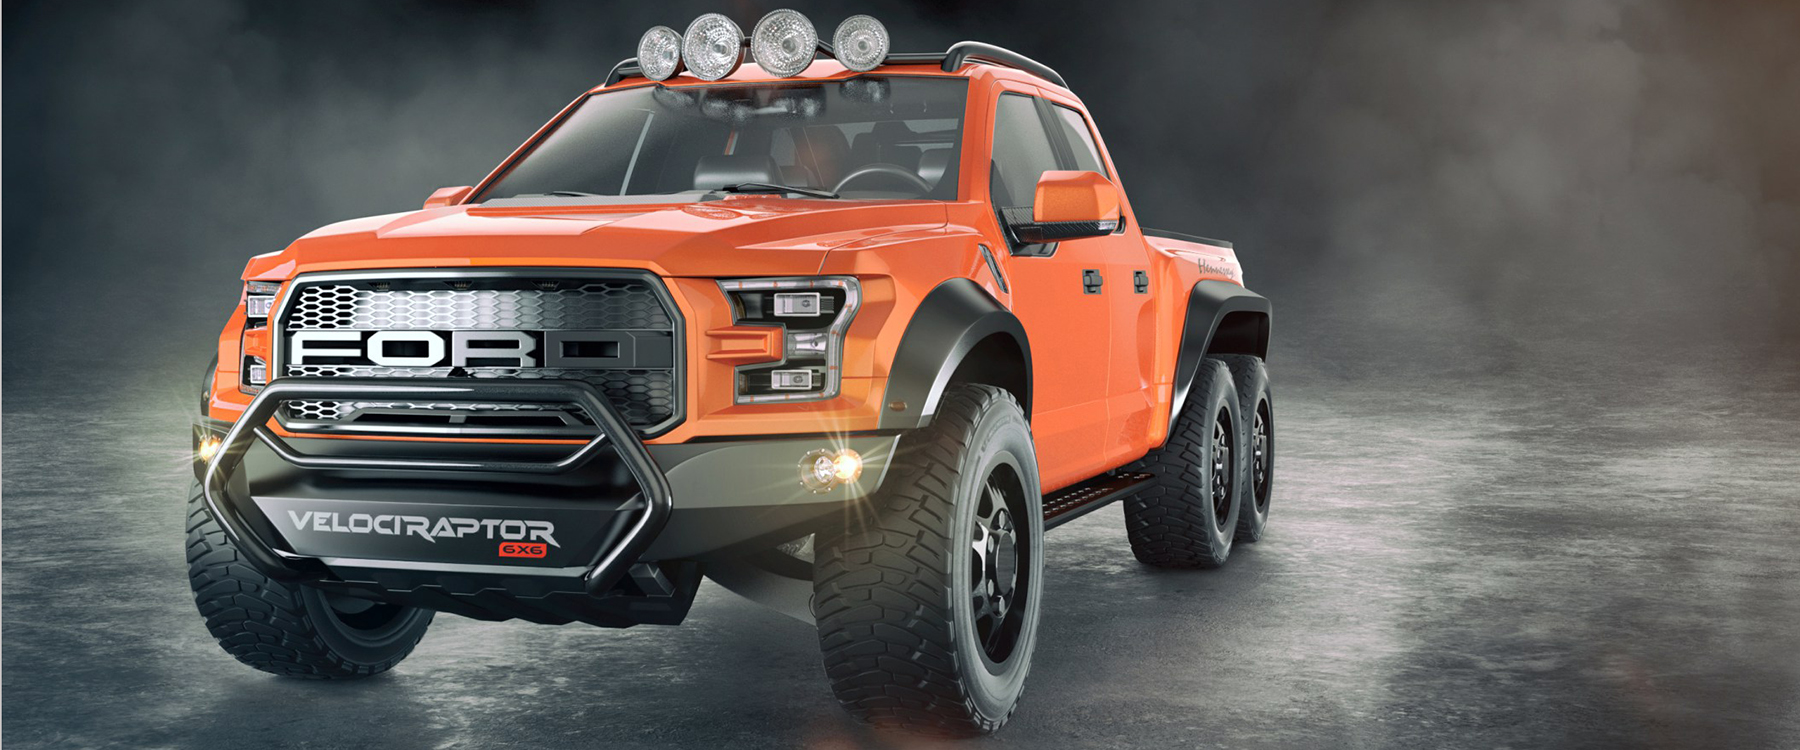 ford hennessey velociraptor 6x6: six wheels and 650 hp